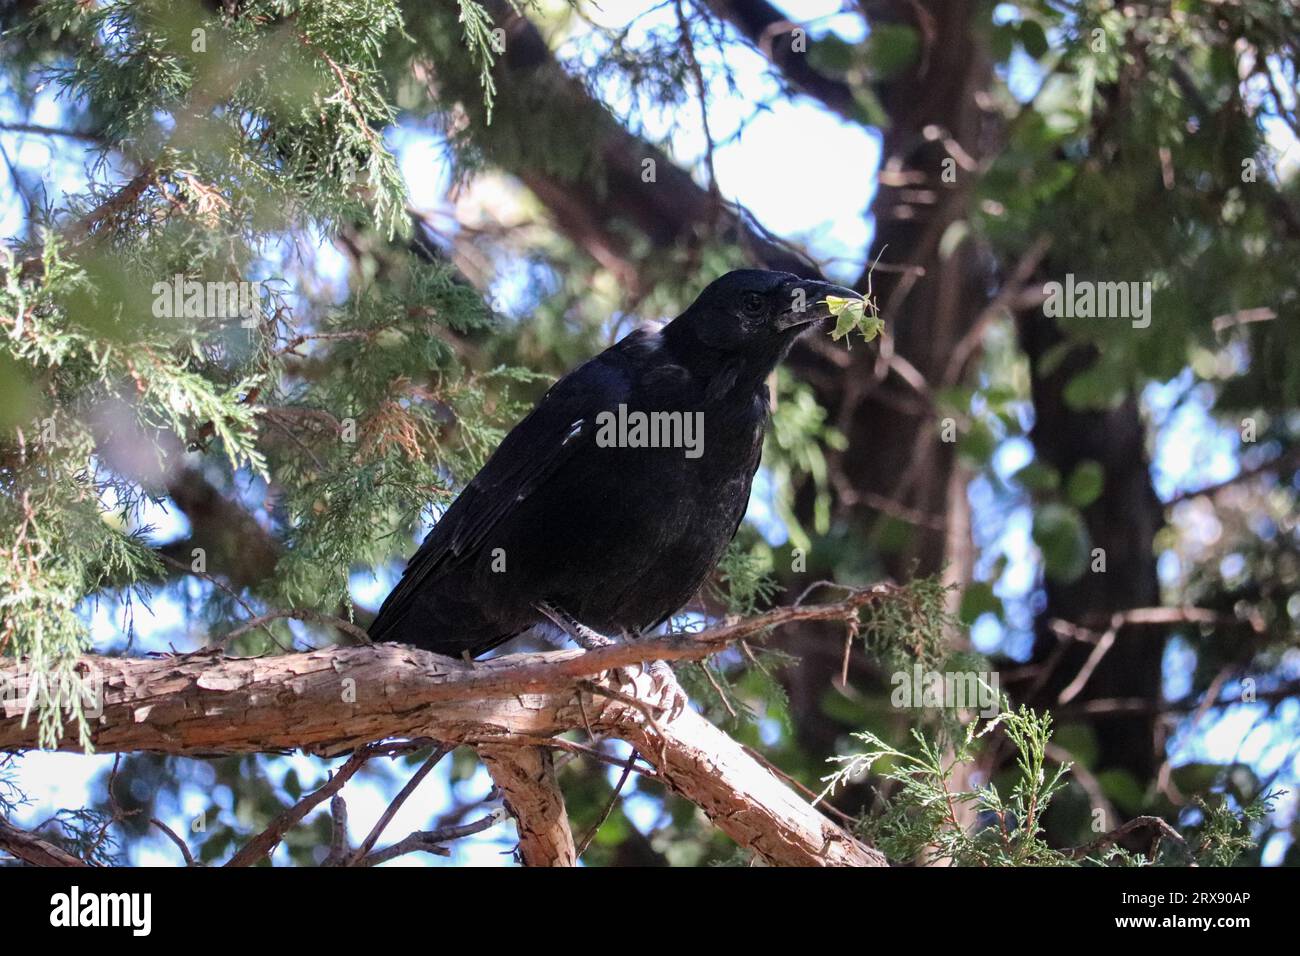 Common Raven or Corvus corax feeding on a praying mantis at Rumsey Park in Payson, Arizona. Stock Photo